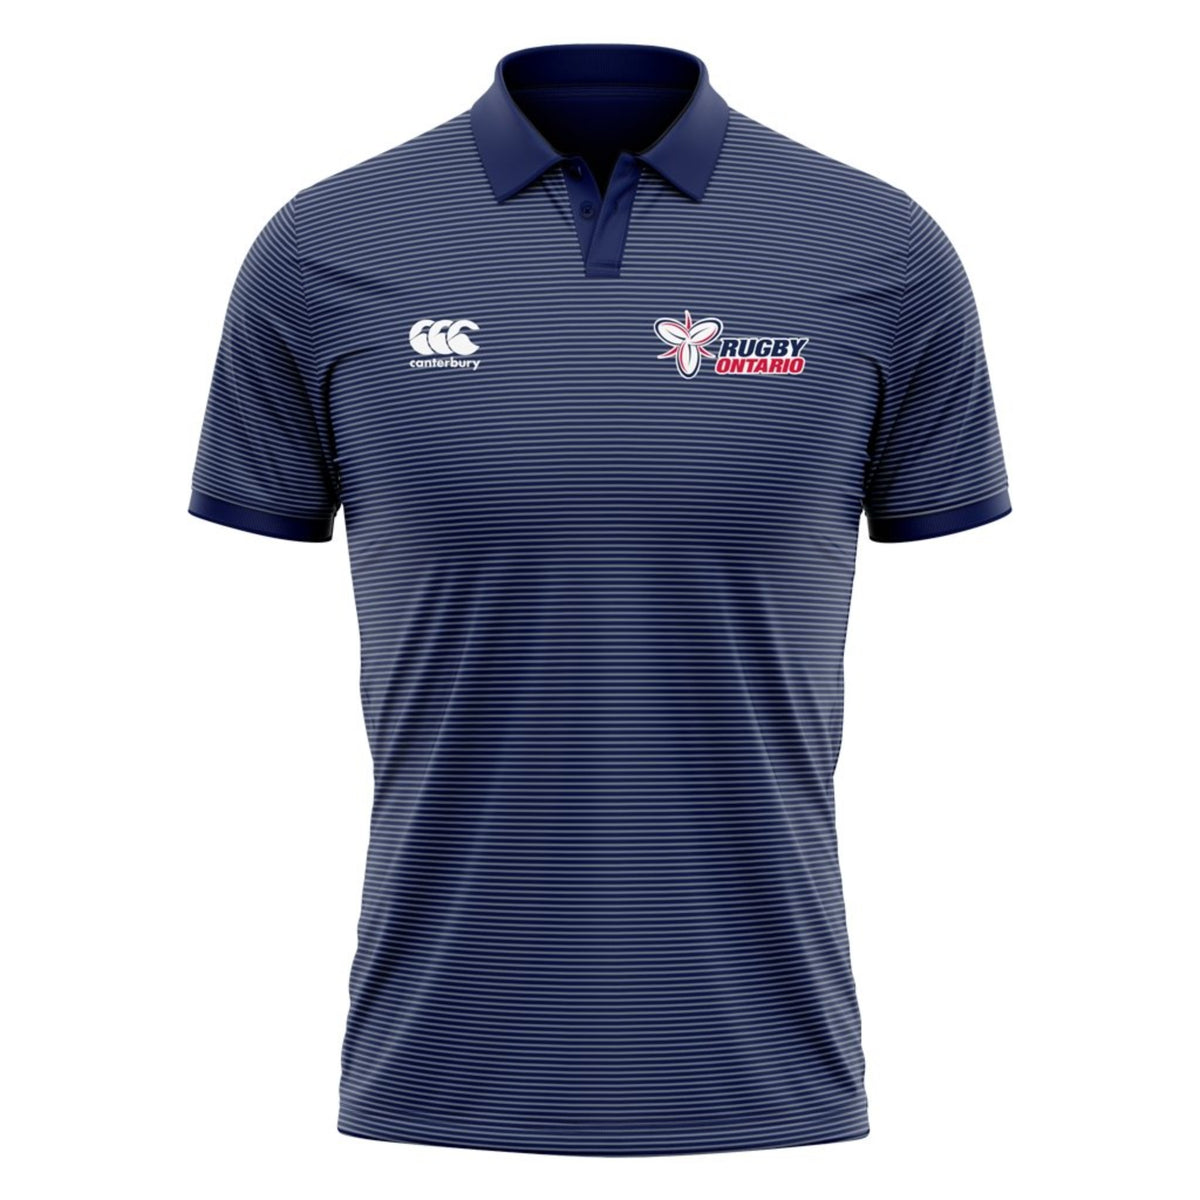 Rugby Ontario CCC Pinstripe Performance Polo - Men&#39;s - www.therugbyshop.com www.therugbyshop.com MEN&#39;S / NAVY / XS MUDOO POLO Rugby Ontario CCC Pinstripe Performance Polo - Men&#39;s